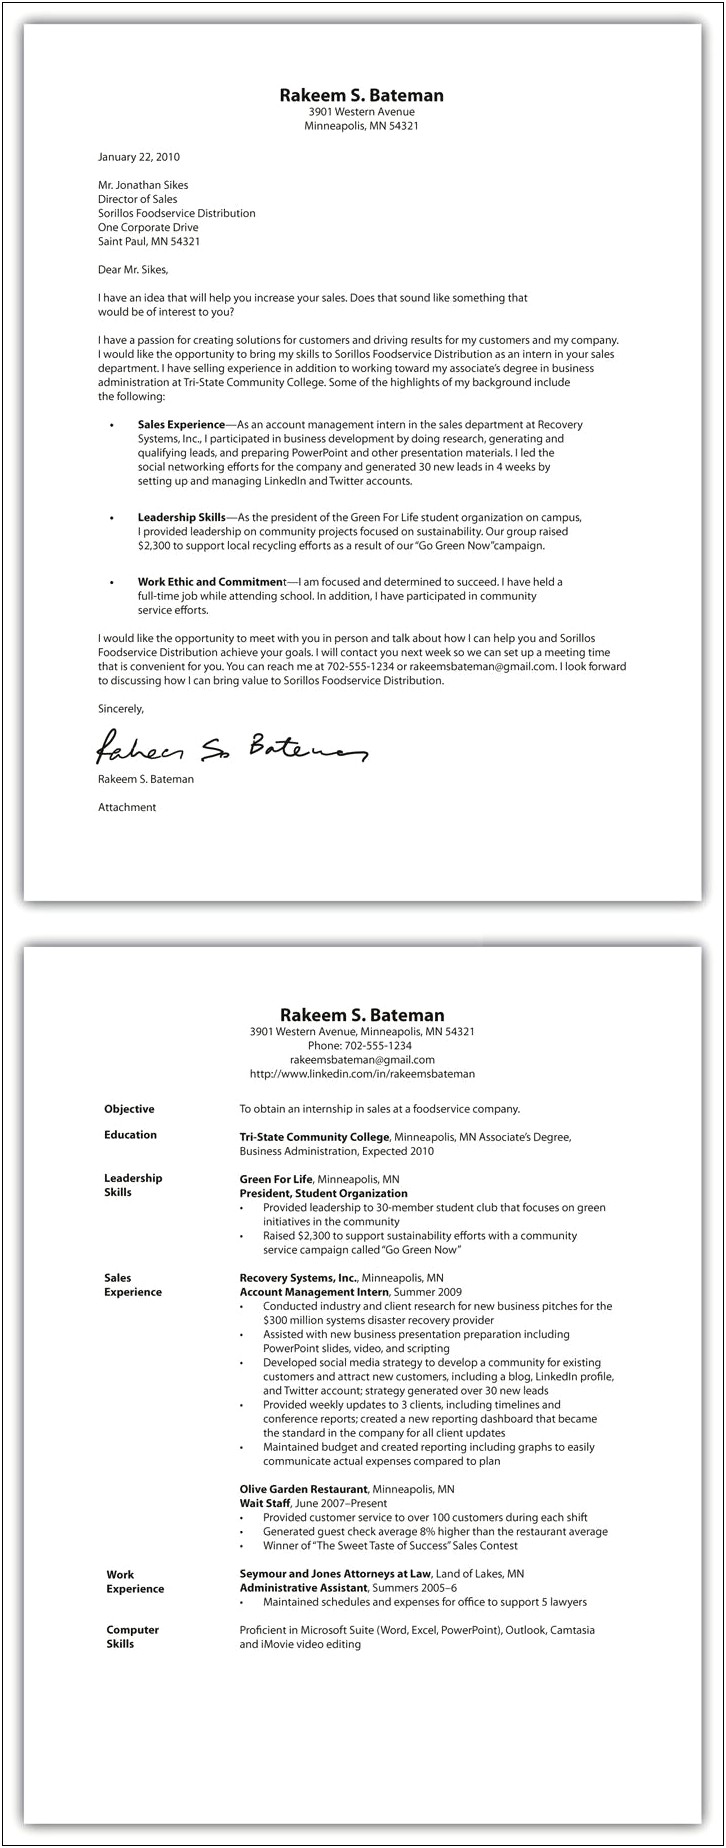 Cover Letter And Resume On Same Paper